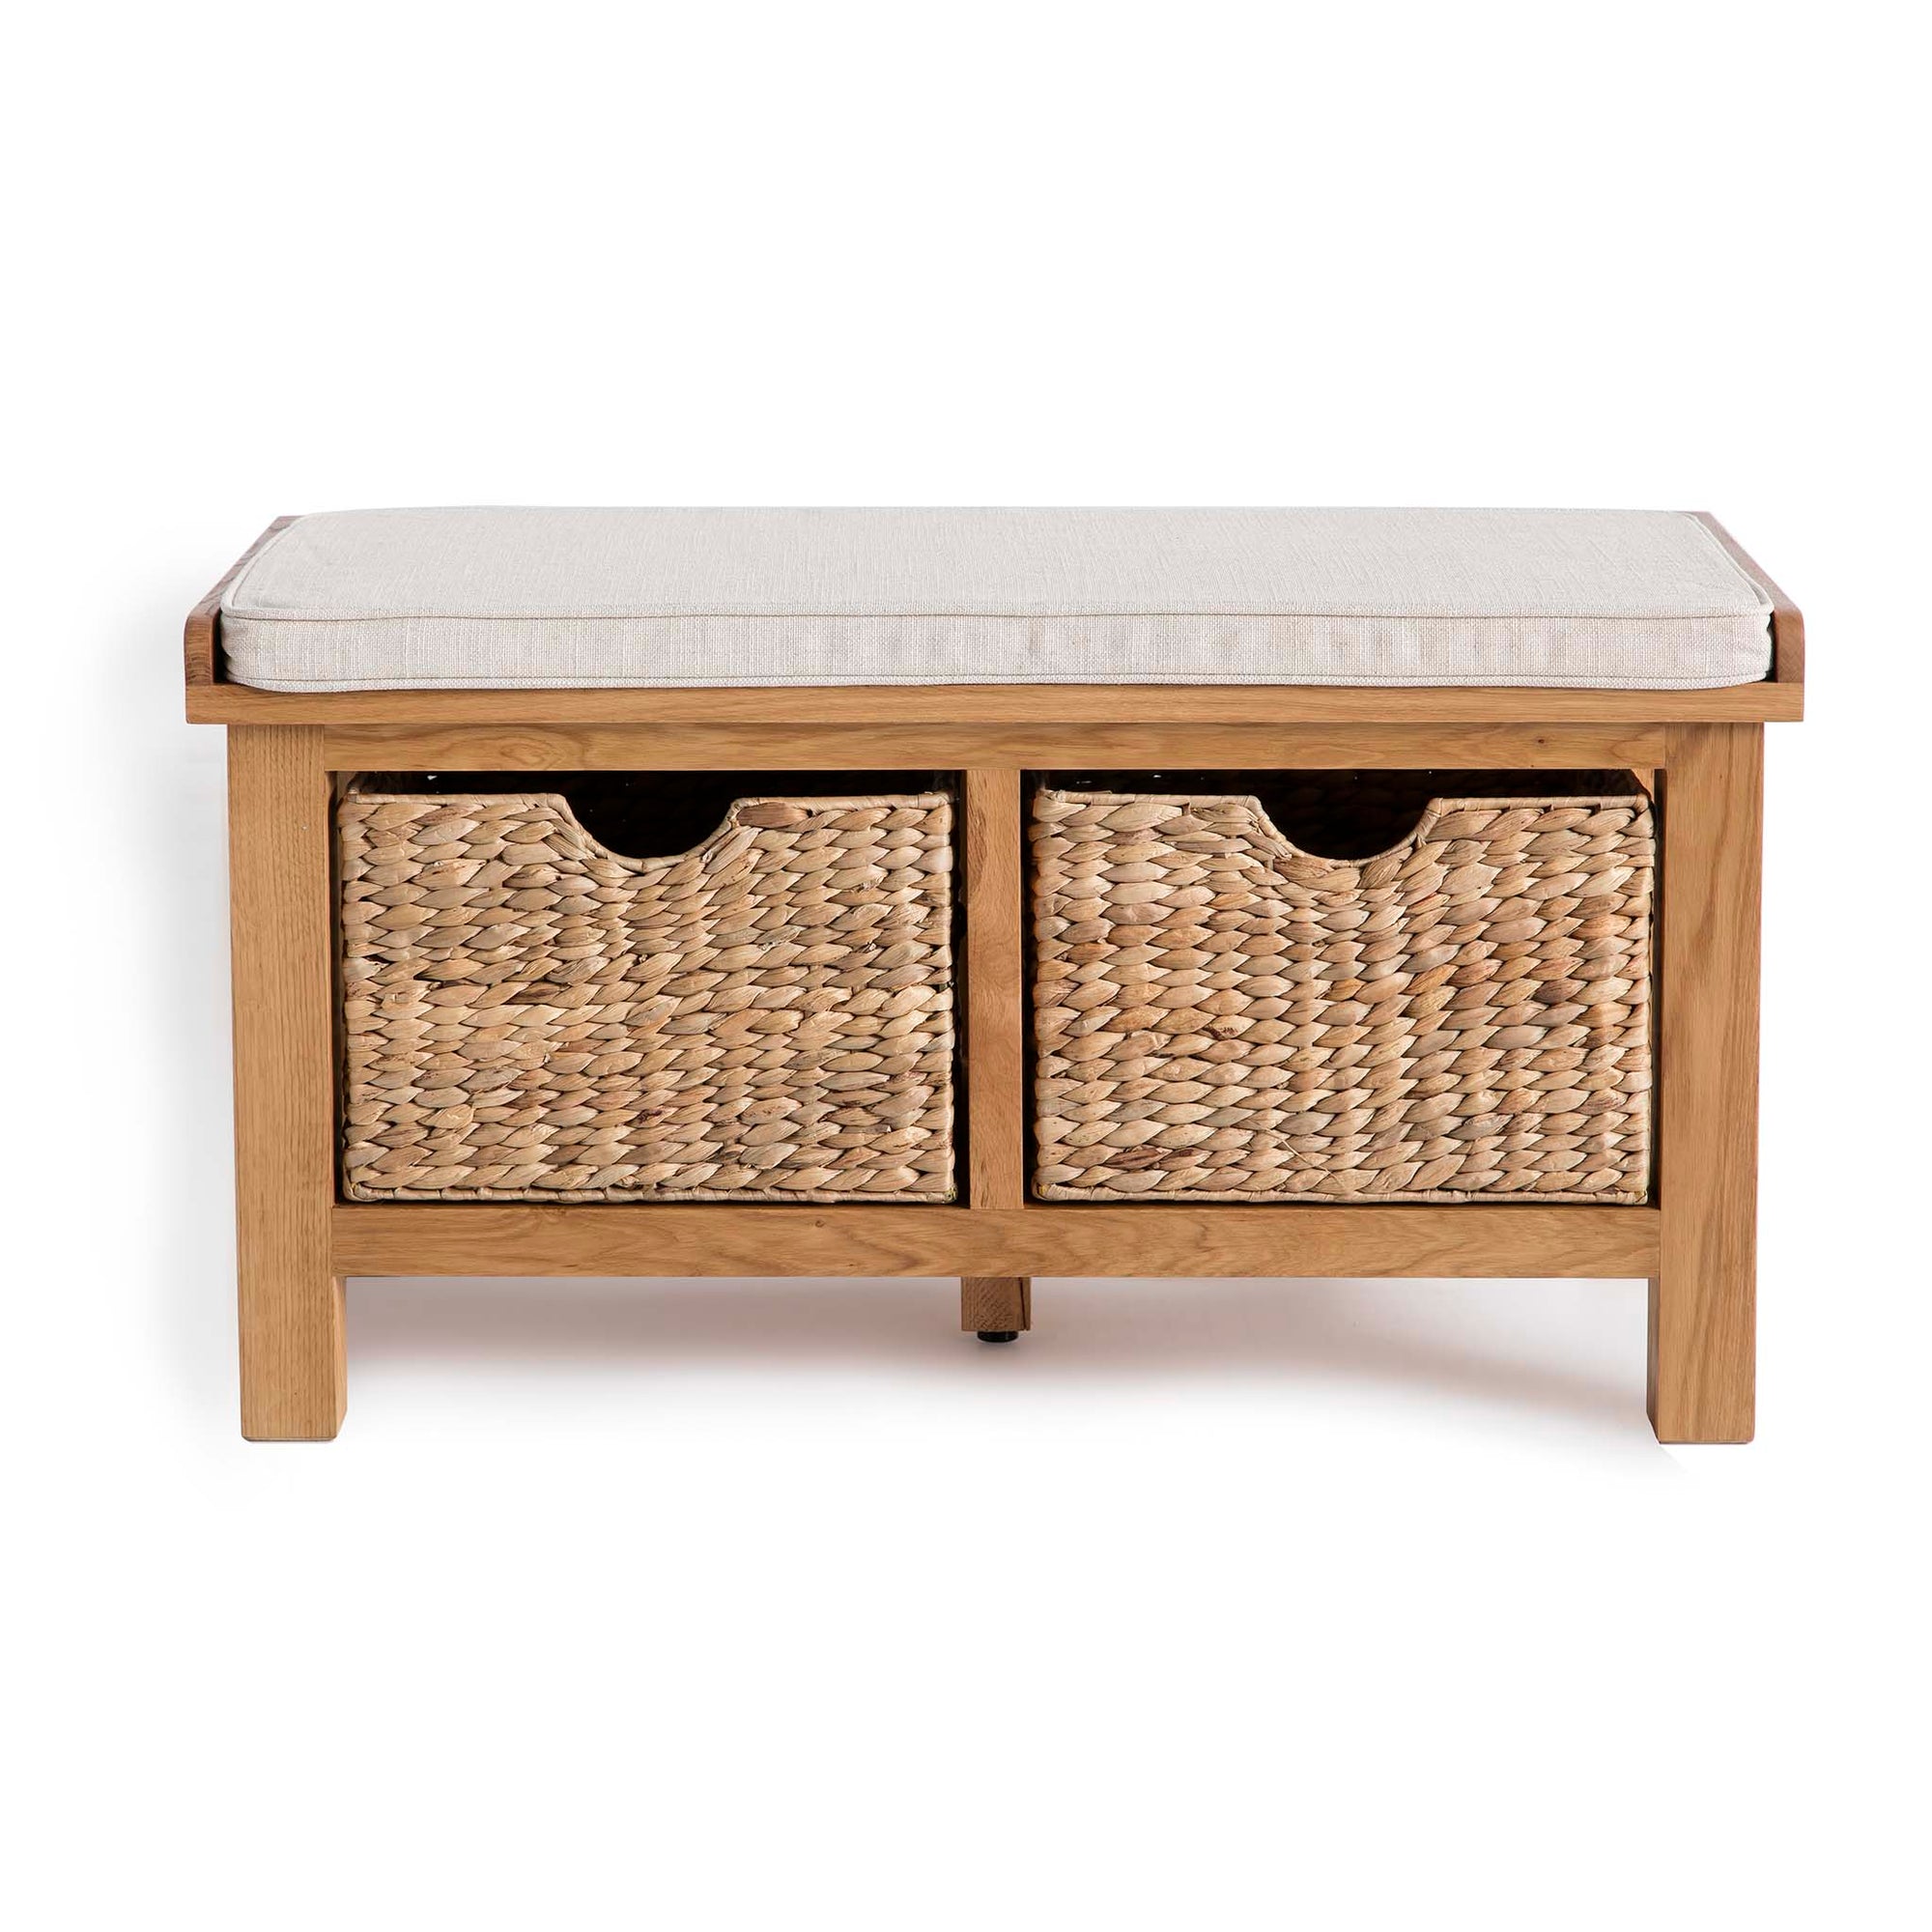 Surrey Oak 90cm Hallway Storage Bench With Baskets Soft Fabric Seat For 2 3 People